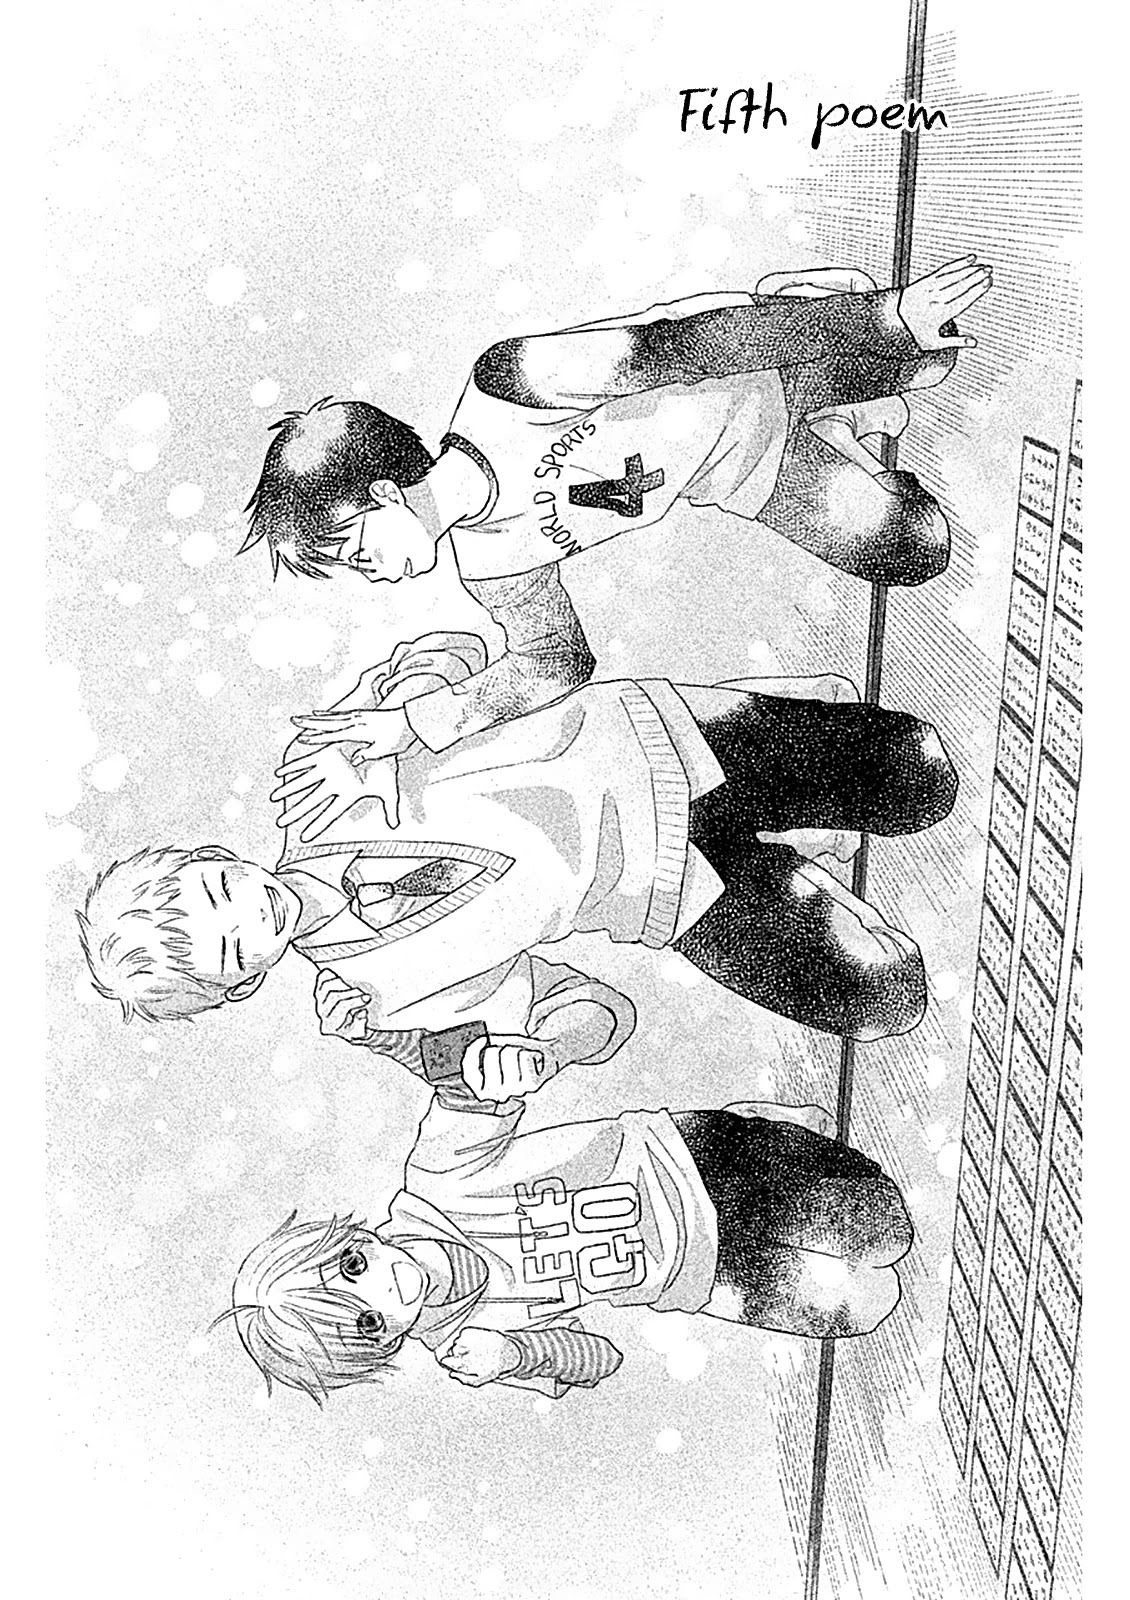 Chihayafuru: Middle School Arc Chapter 5: 5Th Poem - Picture 2